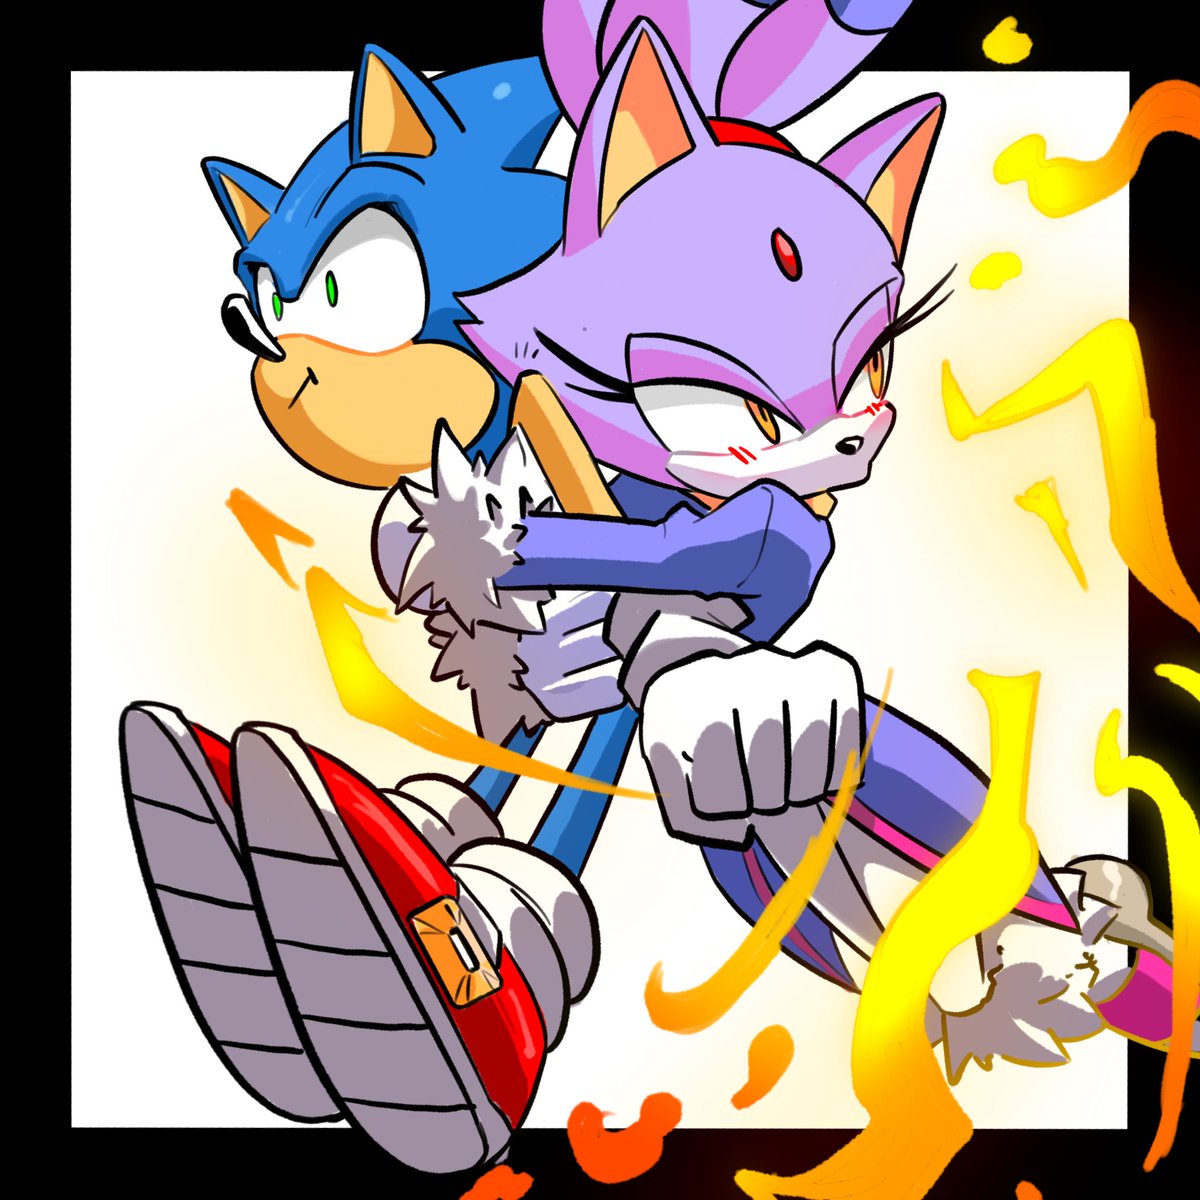 As you all know I’m a SonicxBlaze shipper since they cute and all, and it made me scream that he held her hand in the new IDW issue. Like they’re so cute! I love them 💙💜